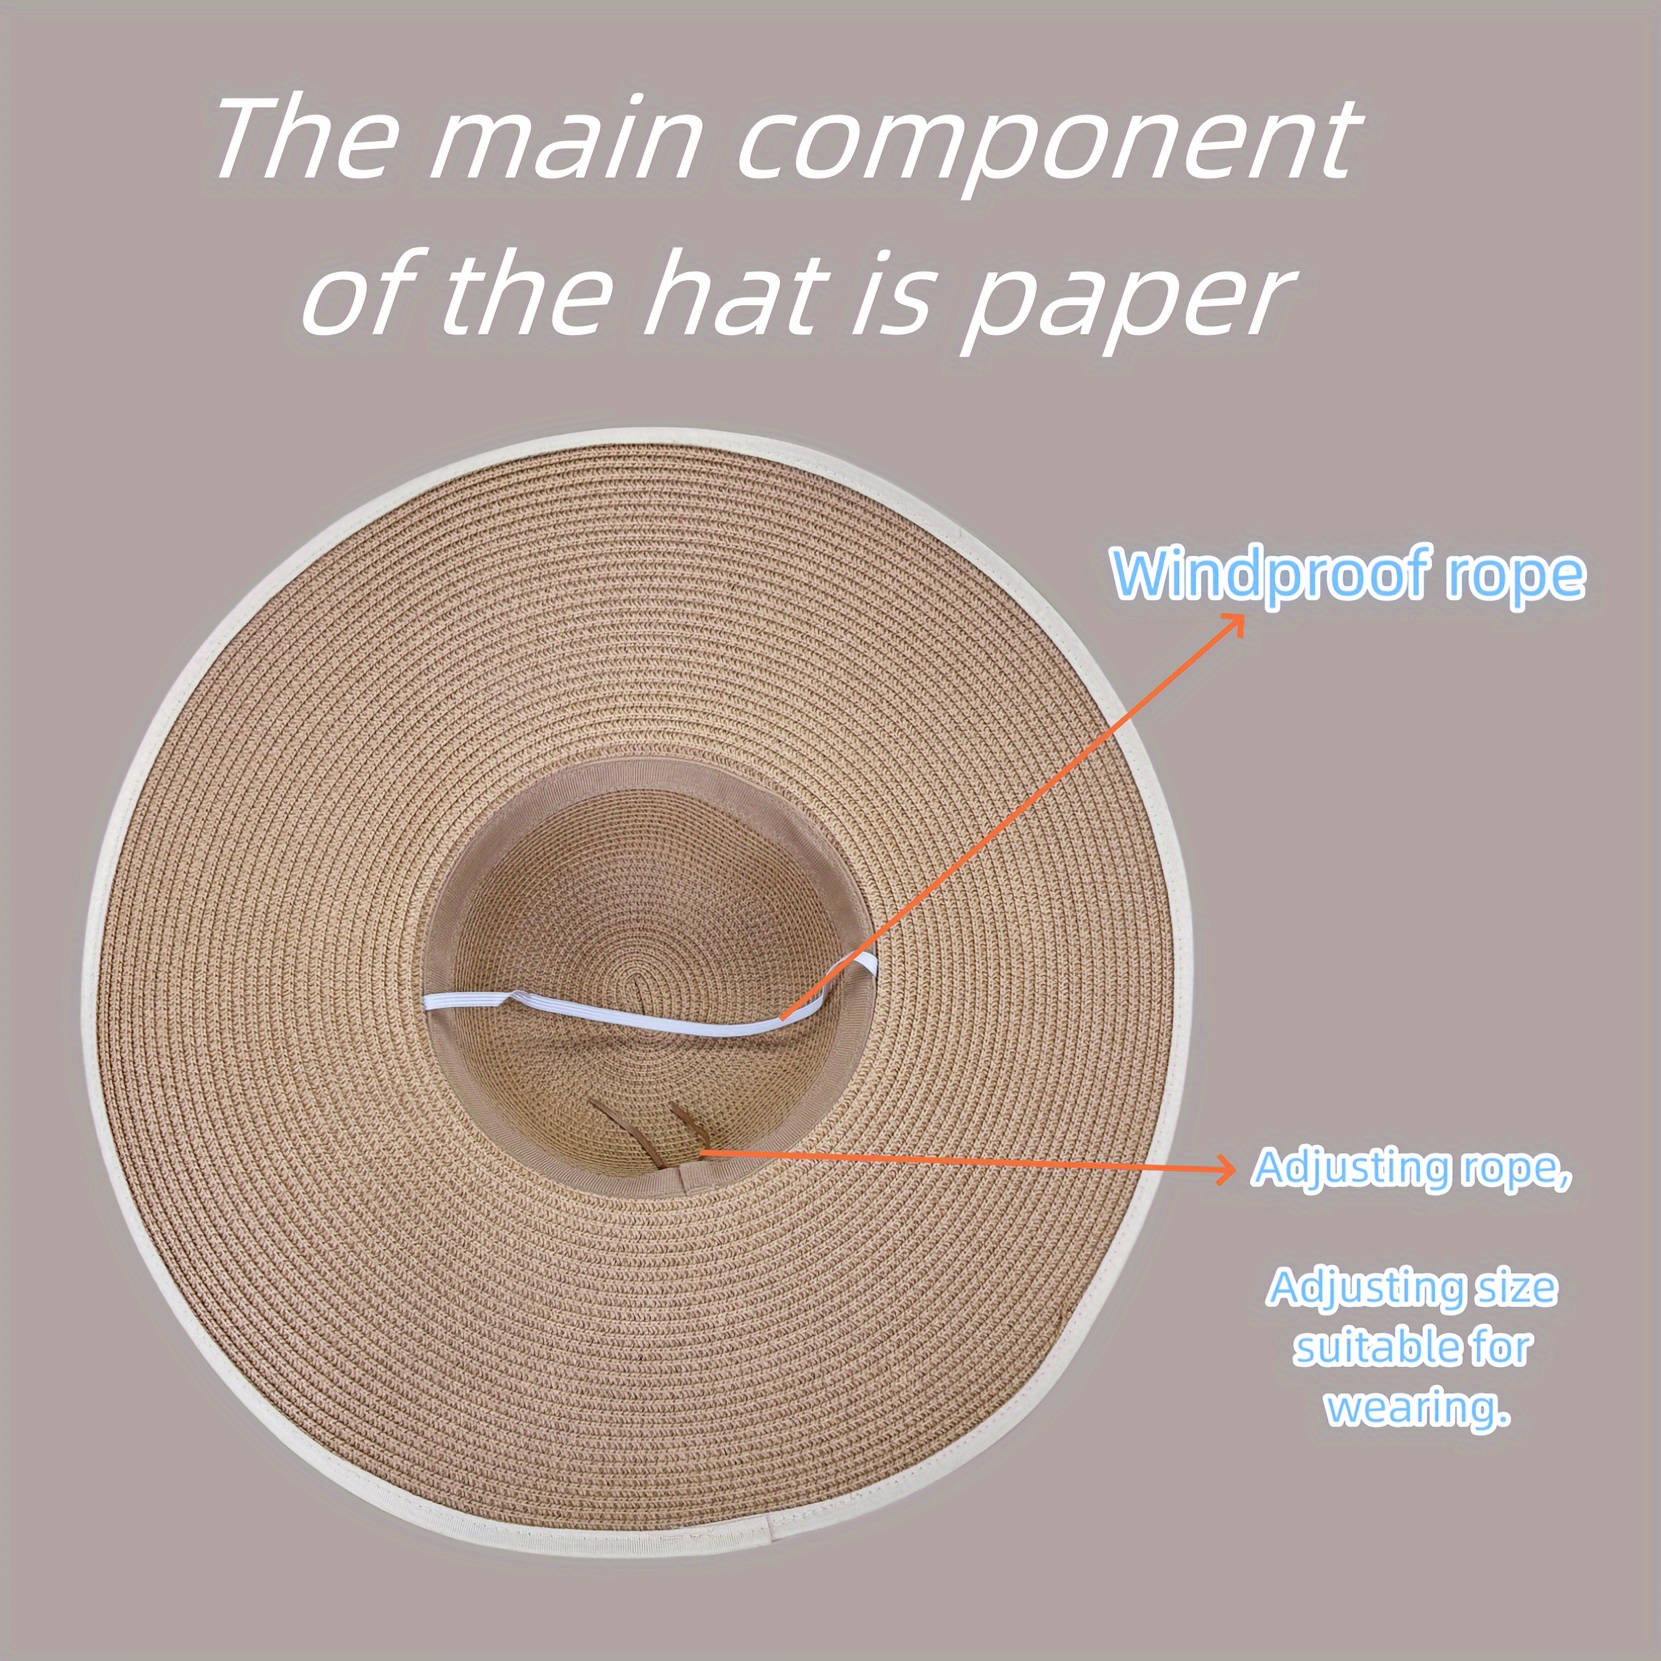 Stay Protected In Style: Foldable Wide Brim Sunshade Floppy - Temu